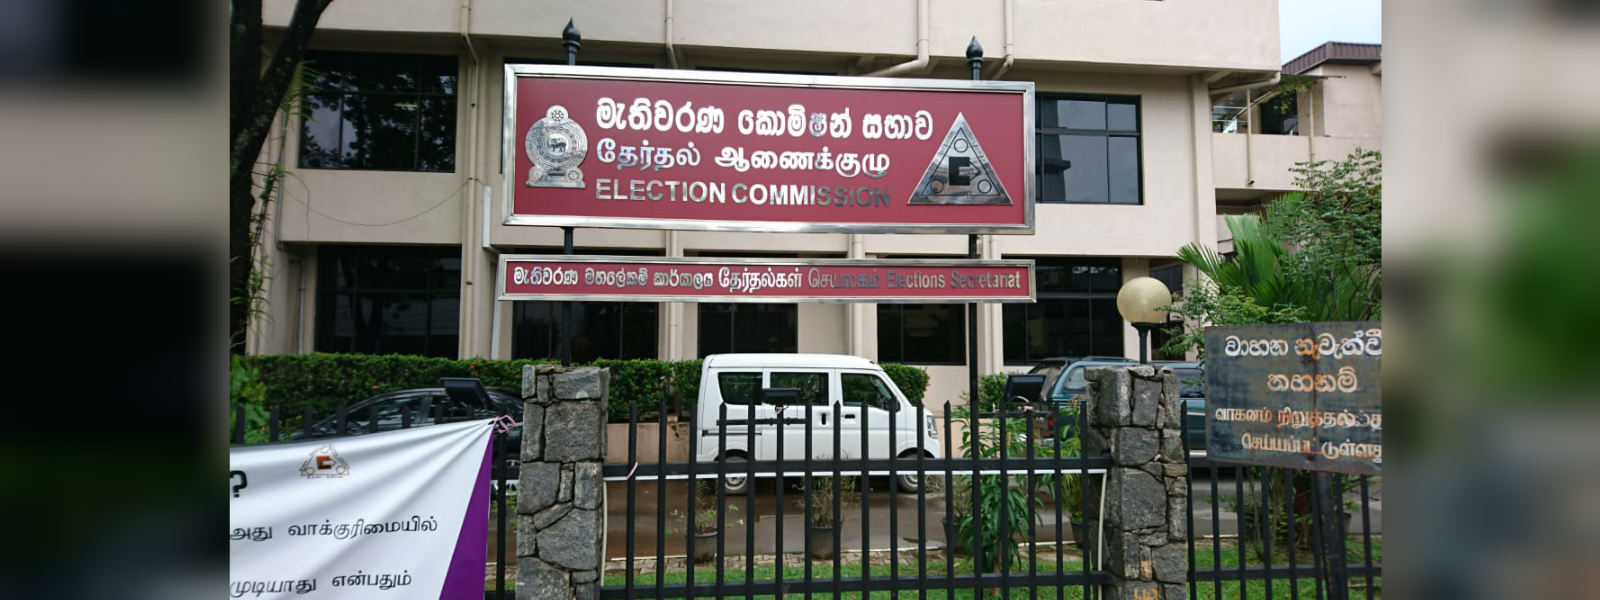 3905 election related complaints: NEC